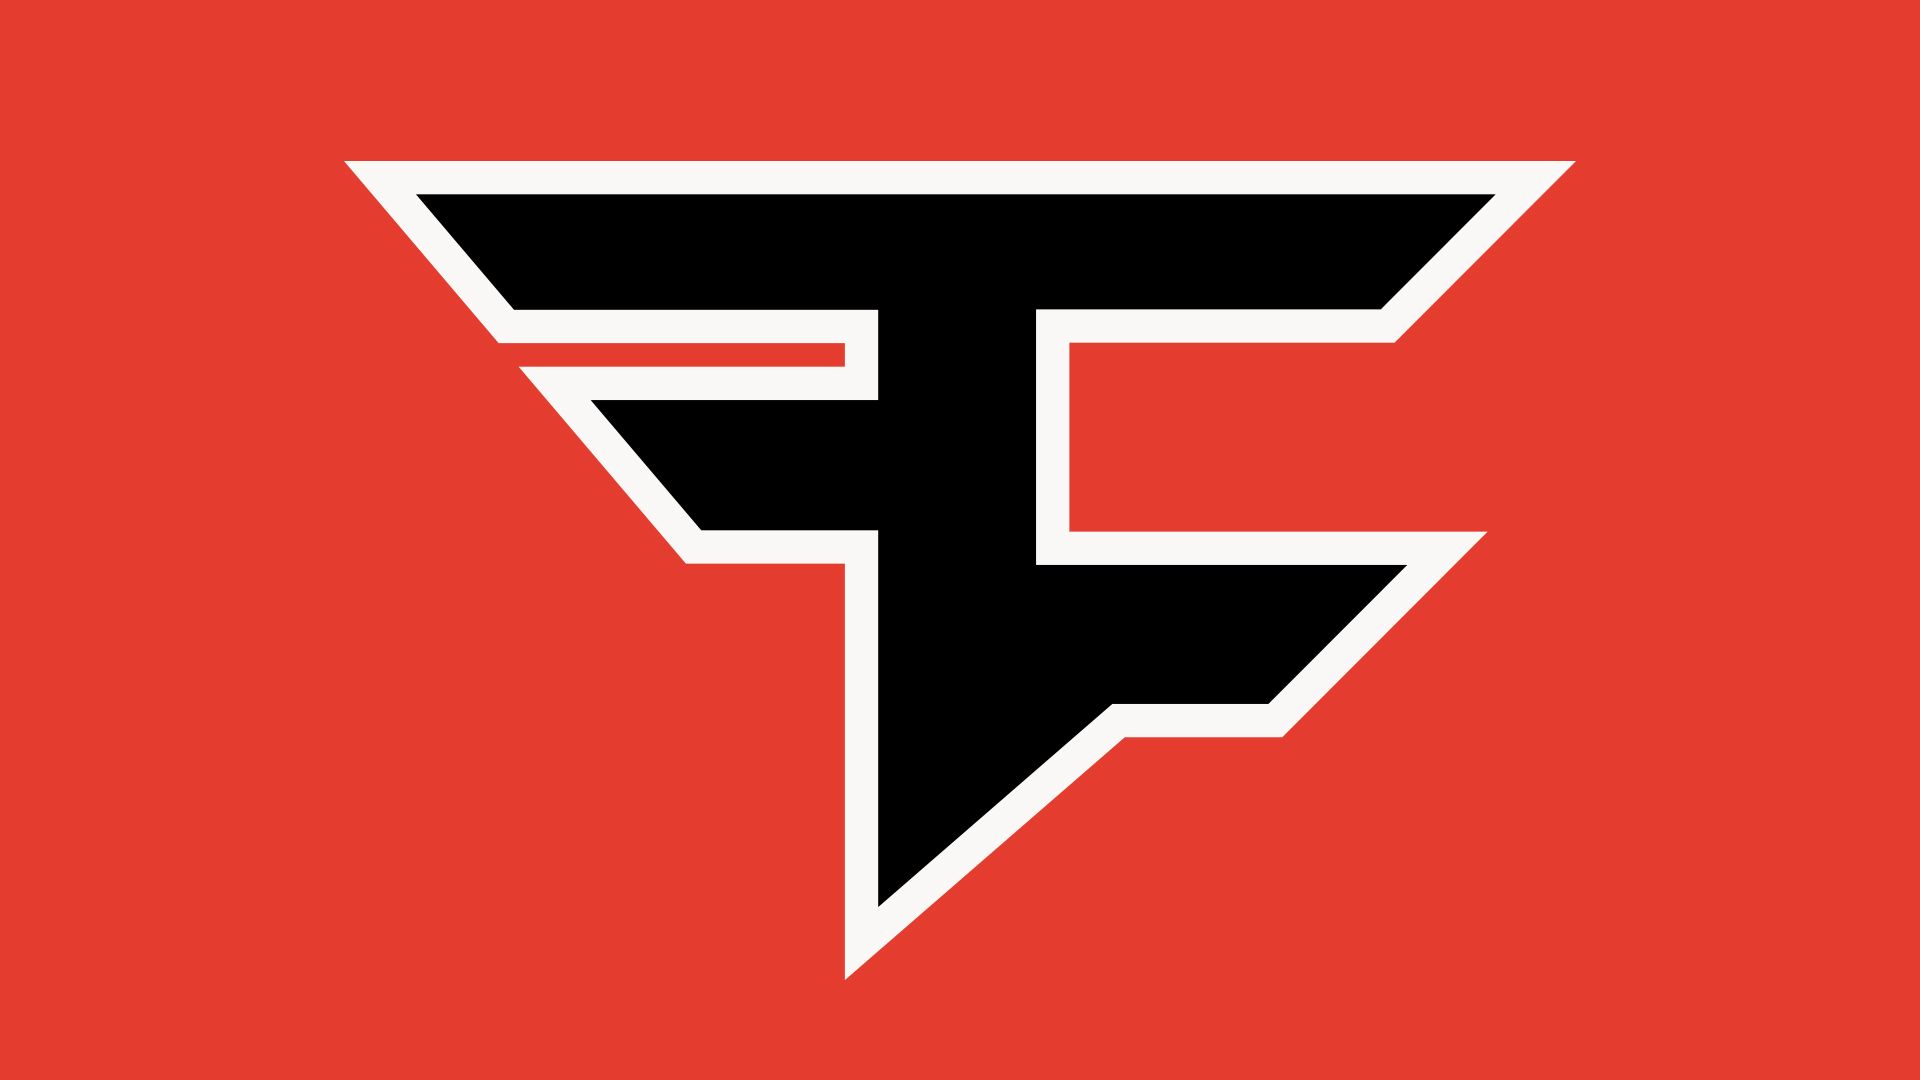 Fortnite Player Dubs Suspended From FaZe Over Racial Slur